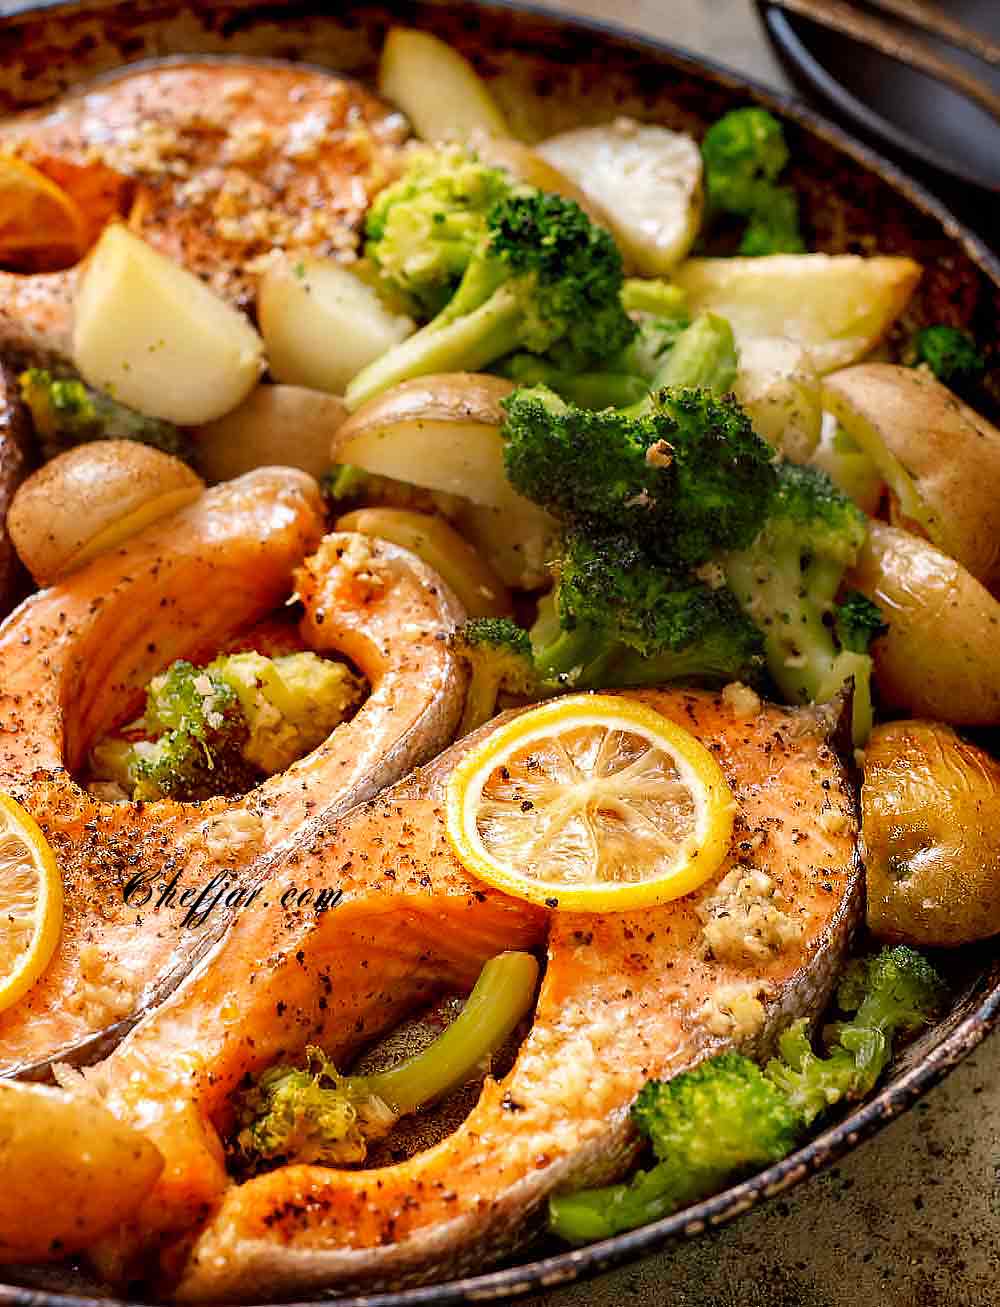 baked salmon with potatoes and vegetables